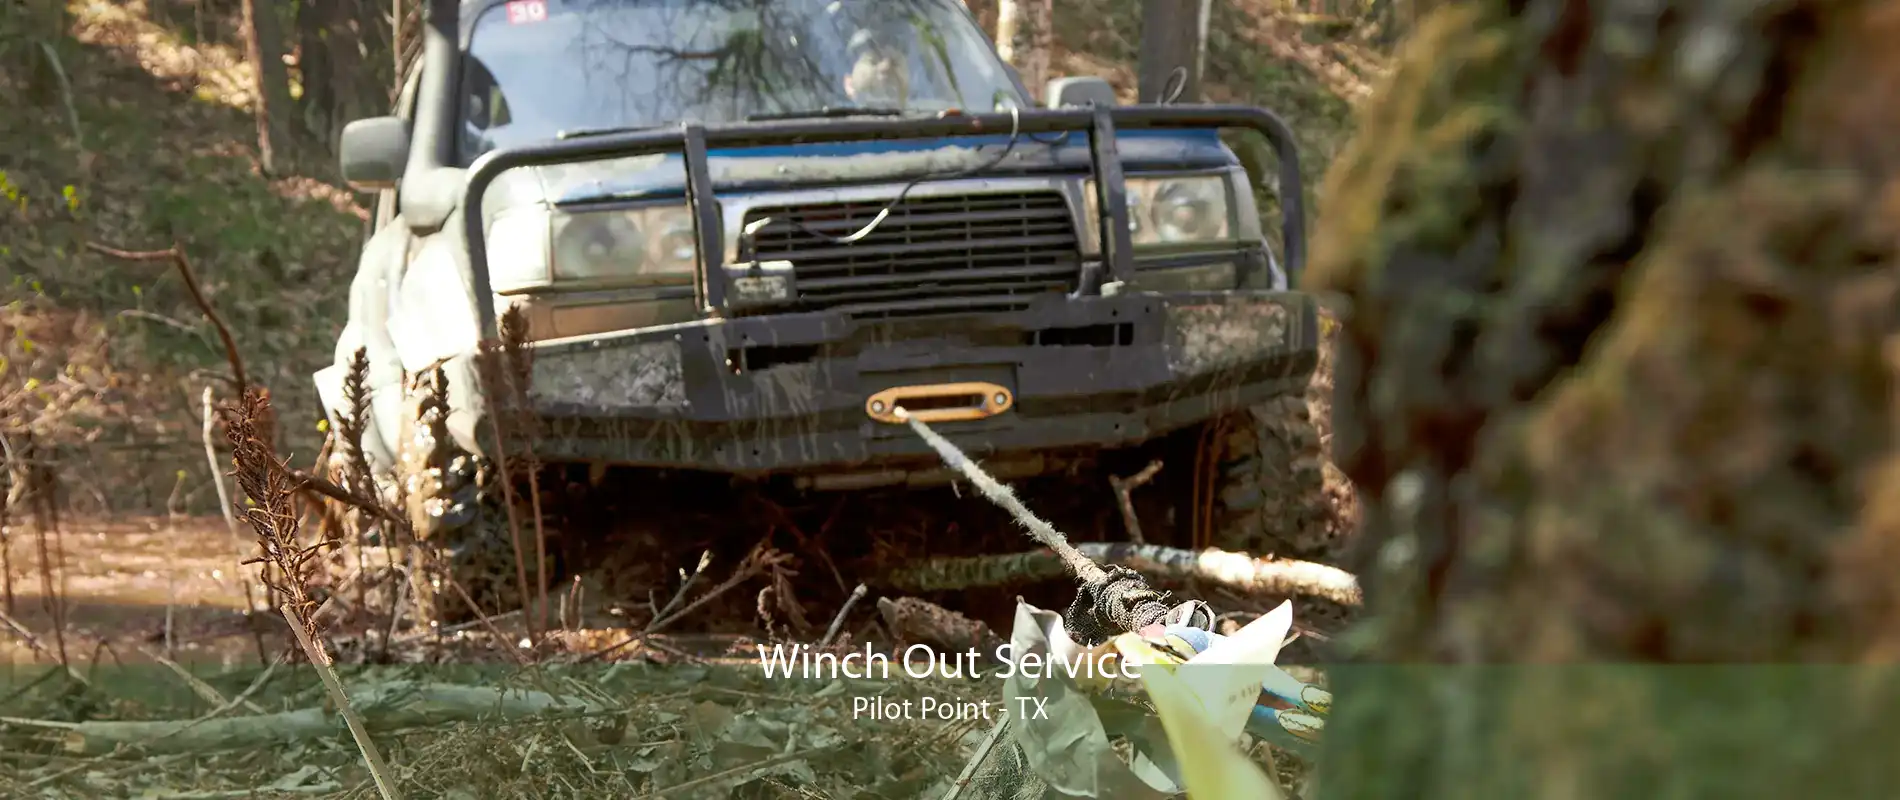 Winch Out Service Pilot Point - TX